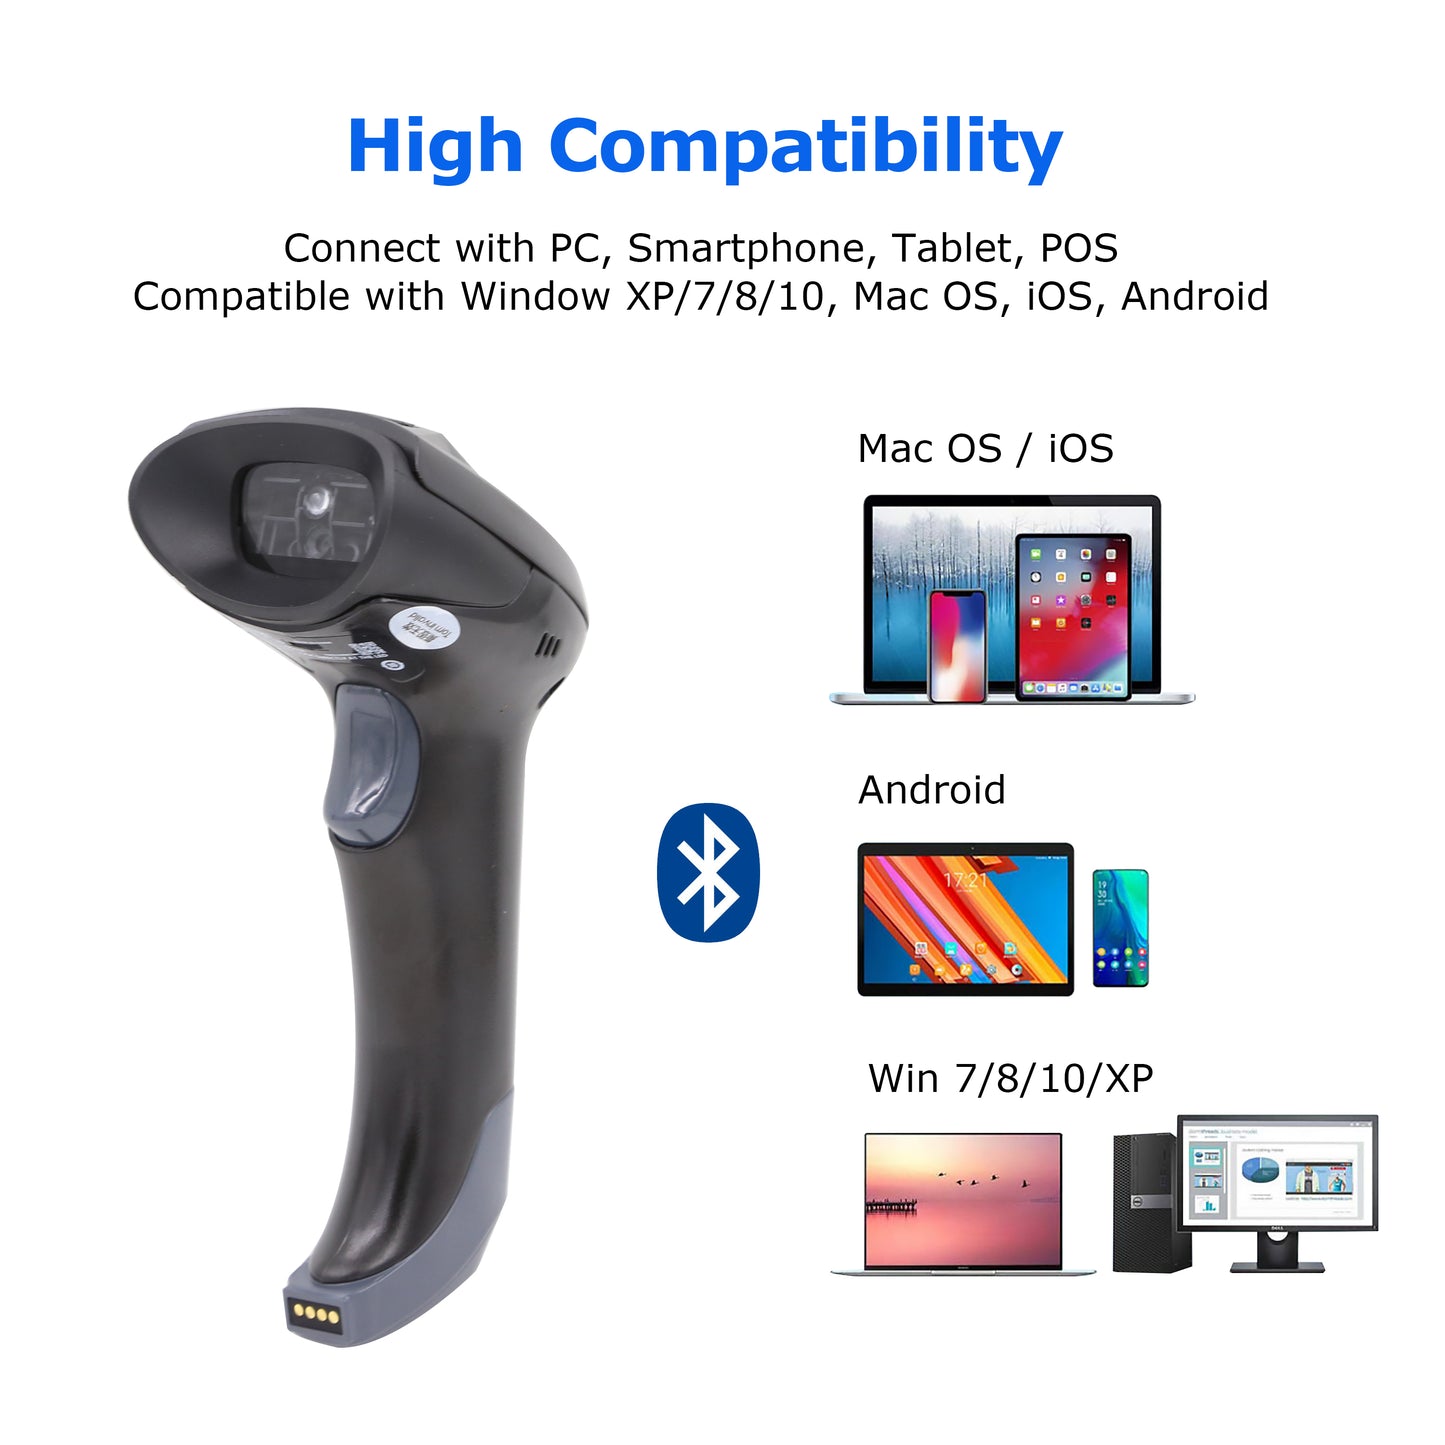 TEEMI TMSL-56 QR Bluetooth Barcode Scanner, 1D 2D Wireless USB Imager for iPhone ipad Andriod Smartphone Tablet Mac Windows PC, Support PDF417 Driver License, Stable Bluetooth 5.0 Technology, with USB Dongle